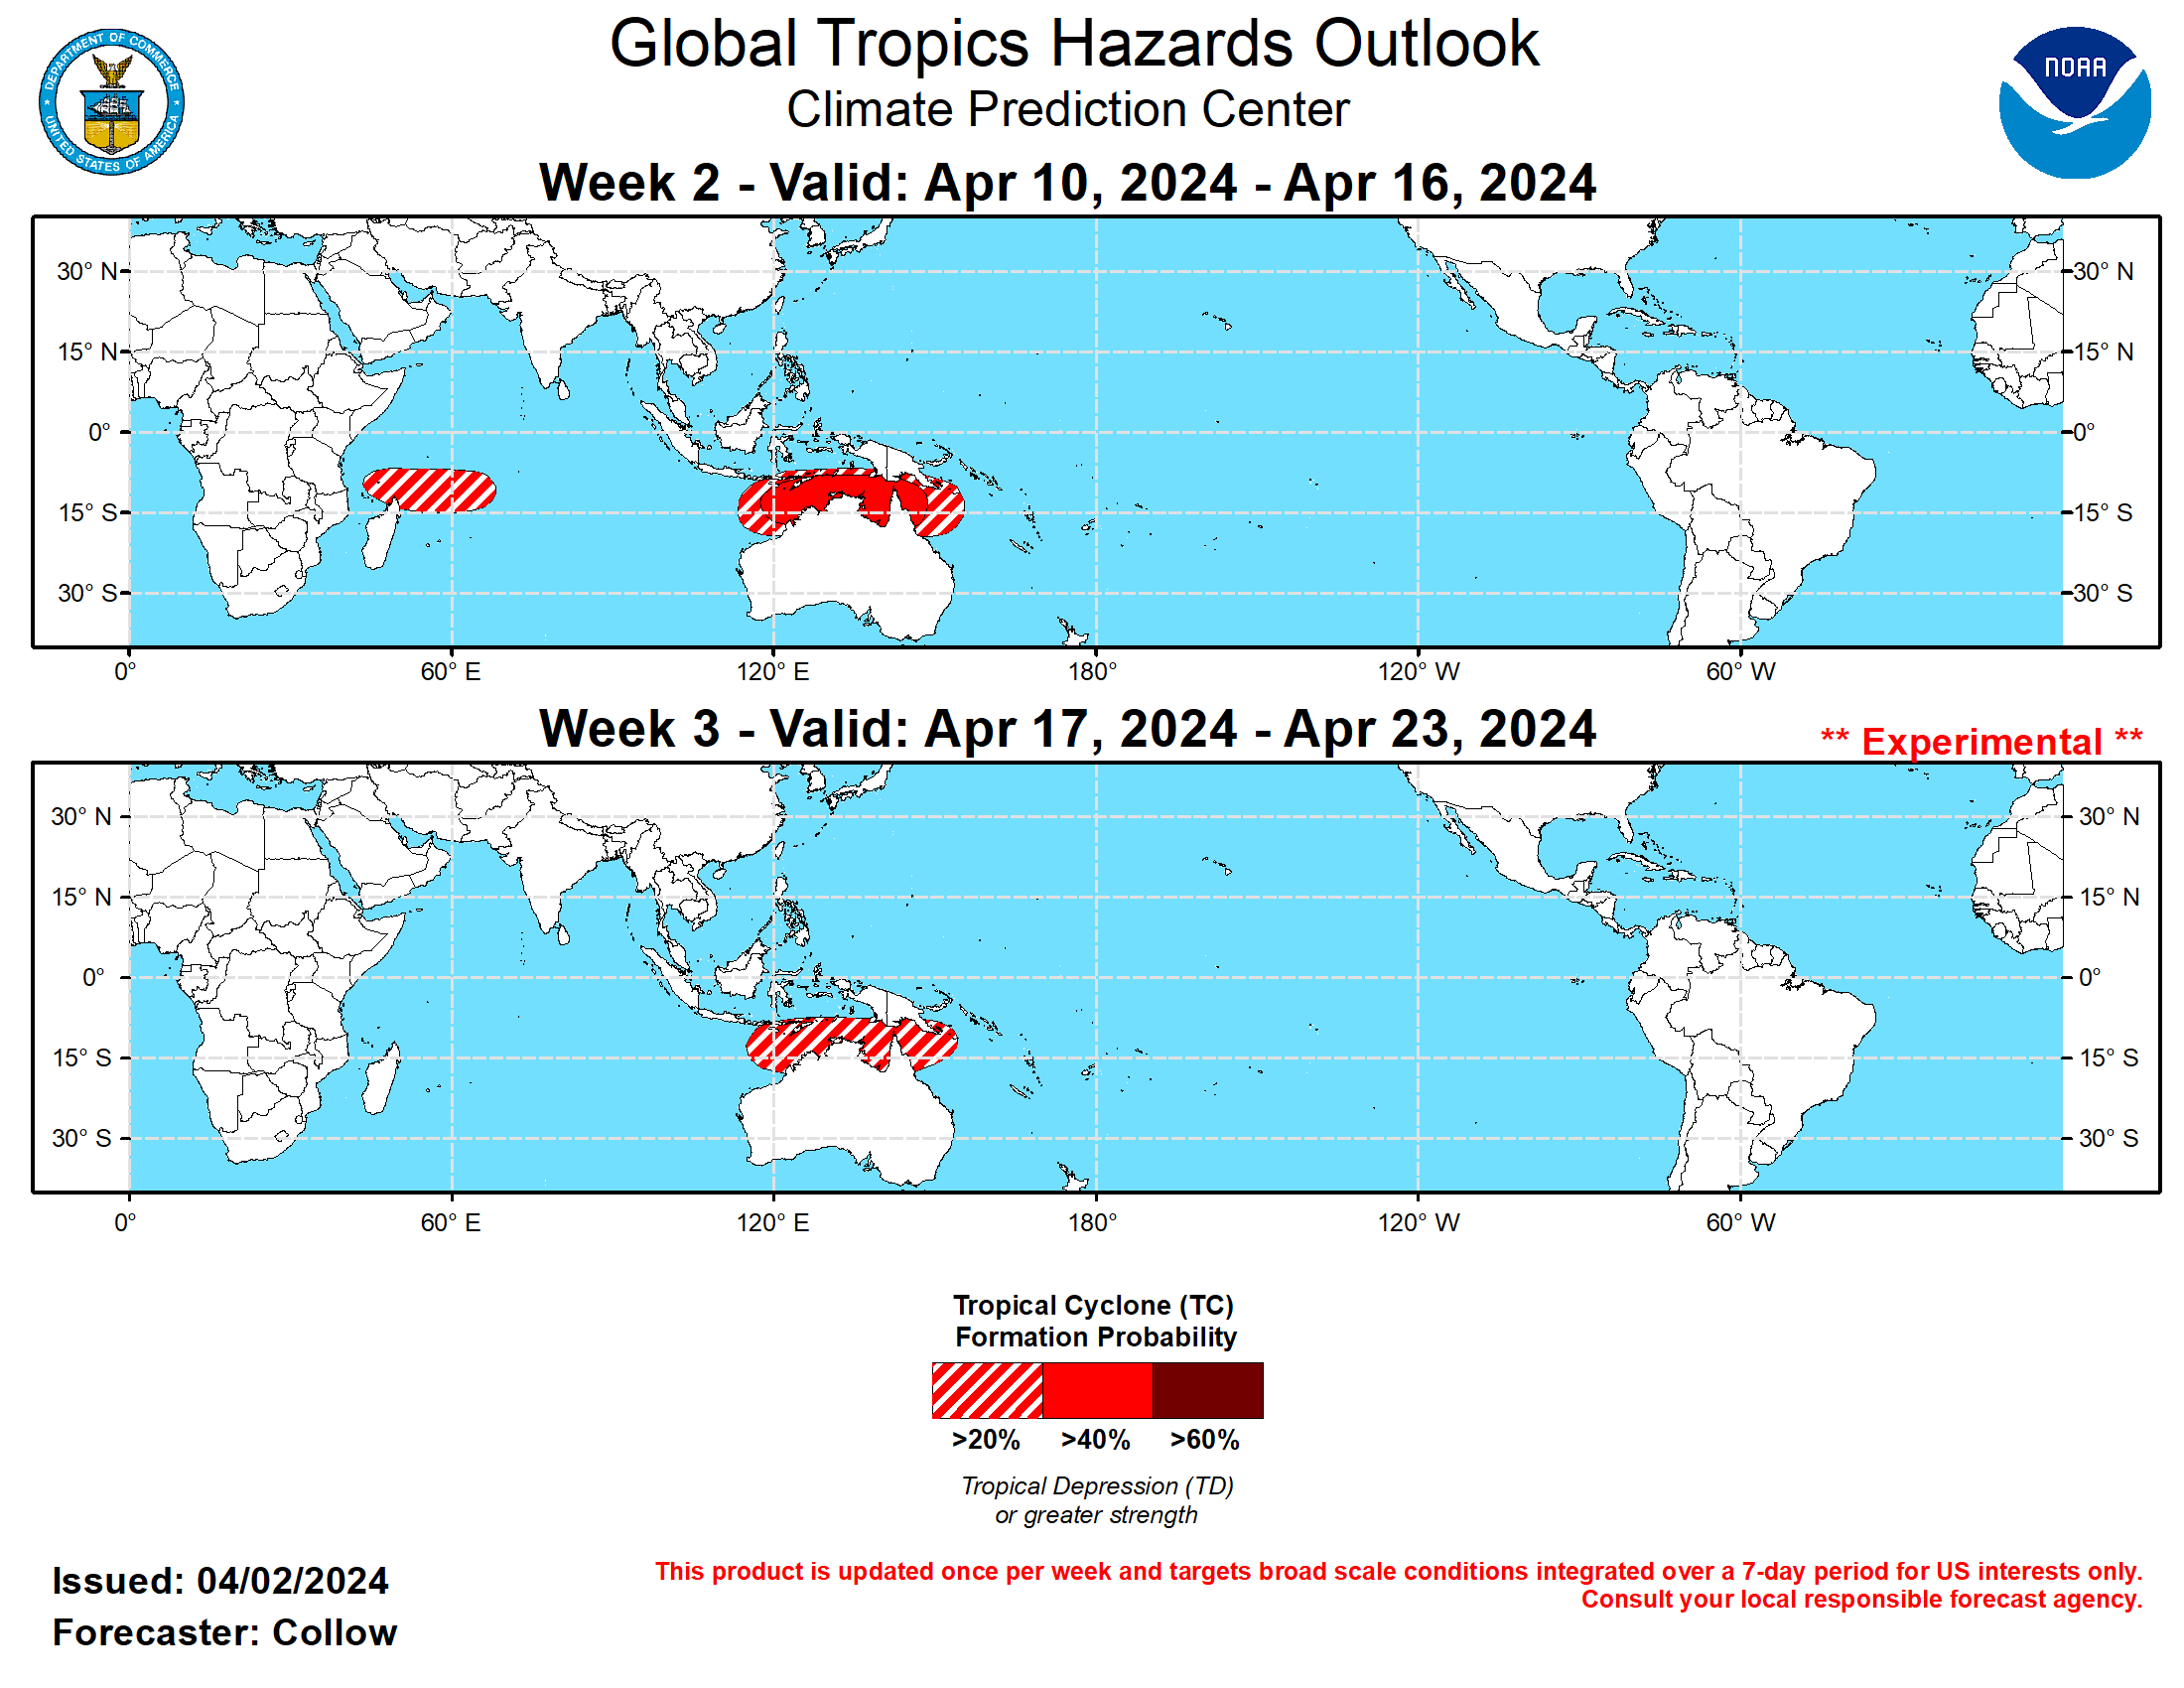 GTH Outlook Discussion Last Updated - 04/02/24 Valid - 04/10/24 - 04/23/24 The Madden Julian Oscillation (MJO) has slowed its eastward propagation during the past week, with the amplitude weakening as it crossed back into the Eastern Hemisphere. The CFS, ECMWF, and GEFS ensembles all predict renewed propagation through the Indian Ocean and into the western Pacific during the 2-3 weeks. As the MJO approaches the Date Line, constructive interference with equatorial Rossby Wave activity is possible. Thereafter, the amplitude of the MJO is more uncertain, with some ensemble members continuing propagation into the Western Hemisphere during late April, while others weaken the intraseasonal signal into the RMM-based unit circle.  An enhanced low frequency signal is noted across the Indian Ocean in the upper-level spatial velocity potential field, with enhanced divergence aloft across eastern Africa and the western Indian Ocean. This is due in part to the slowing of the MJO over the region, although dynamical models persist this low frequency signal throughout April. While an uptick in the Dipole Mode Index (DMI) during March may be suggestive of a reemerging positive Indian Ocean Dipole event, caution is given due to the time of year, and it is more plausible that the low frequency signal can be attributed to several factors including destructive interference between the MJO and other higher frequency modes of variability, in addition to the weakening El Nino.  No new tropical cyclones (TCs) developed during the past week. As the MJO resumes its eastward propagation, TC development chances are forecast to increase along the northern coast of Australia. A 40 percent chance for TC formation is highlighted during week-2, with a 20 percent chance continuing into week-3, supported by increased TC formation probabilities in the GEFS and ECMWF ensembles. Confidence decreases later in April due to the diminishing seasonal climatology. A 20 percent chance of TC development is also posted across the southwestern Indian Ocean during week-2 due to the persisting low frequency convective signal in that region, although confidence is low and the elevated risk is not continued into week-3.